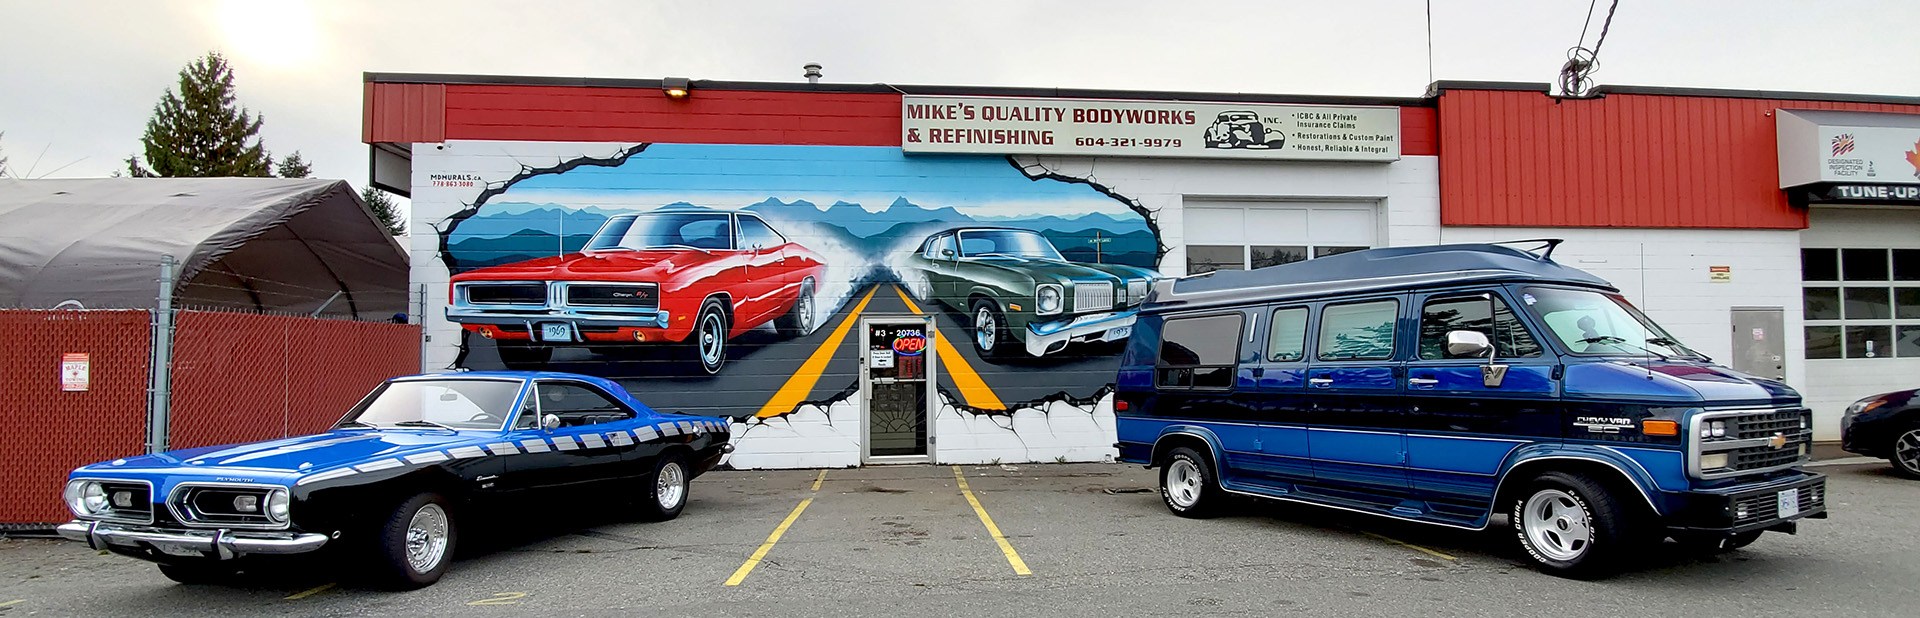 Mike's Quality Bodyworks Store Front Shop